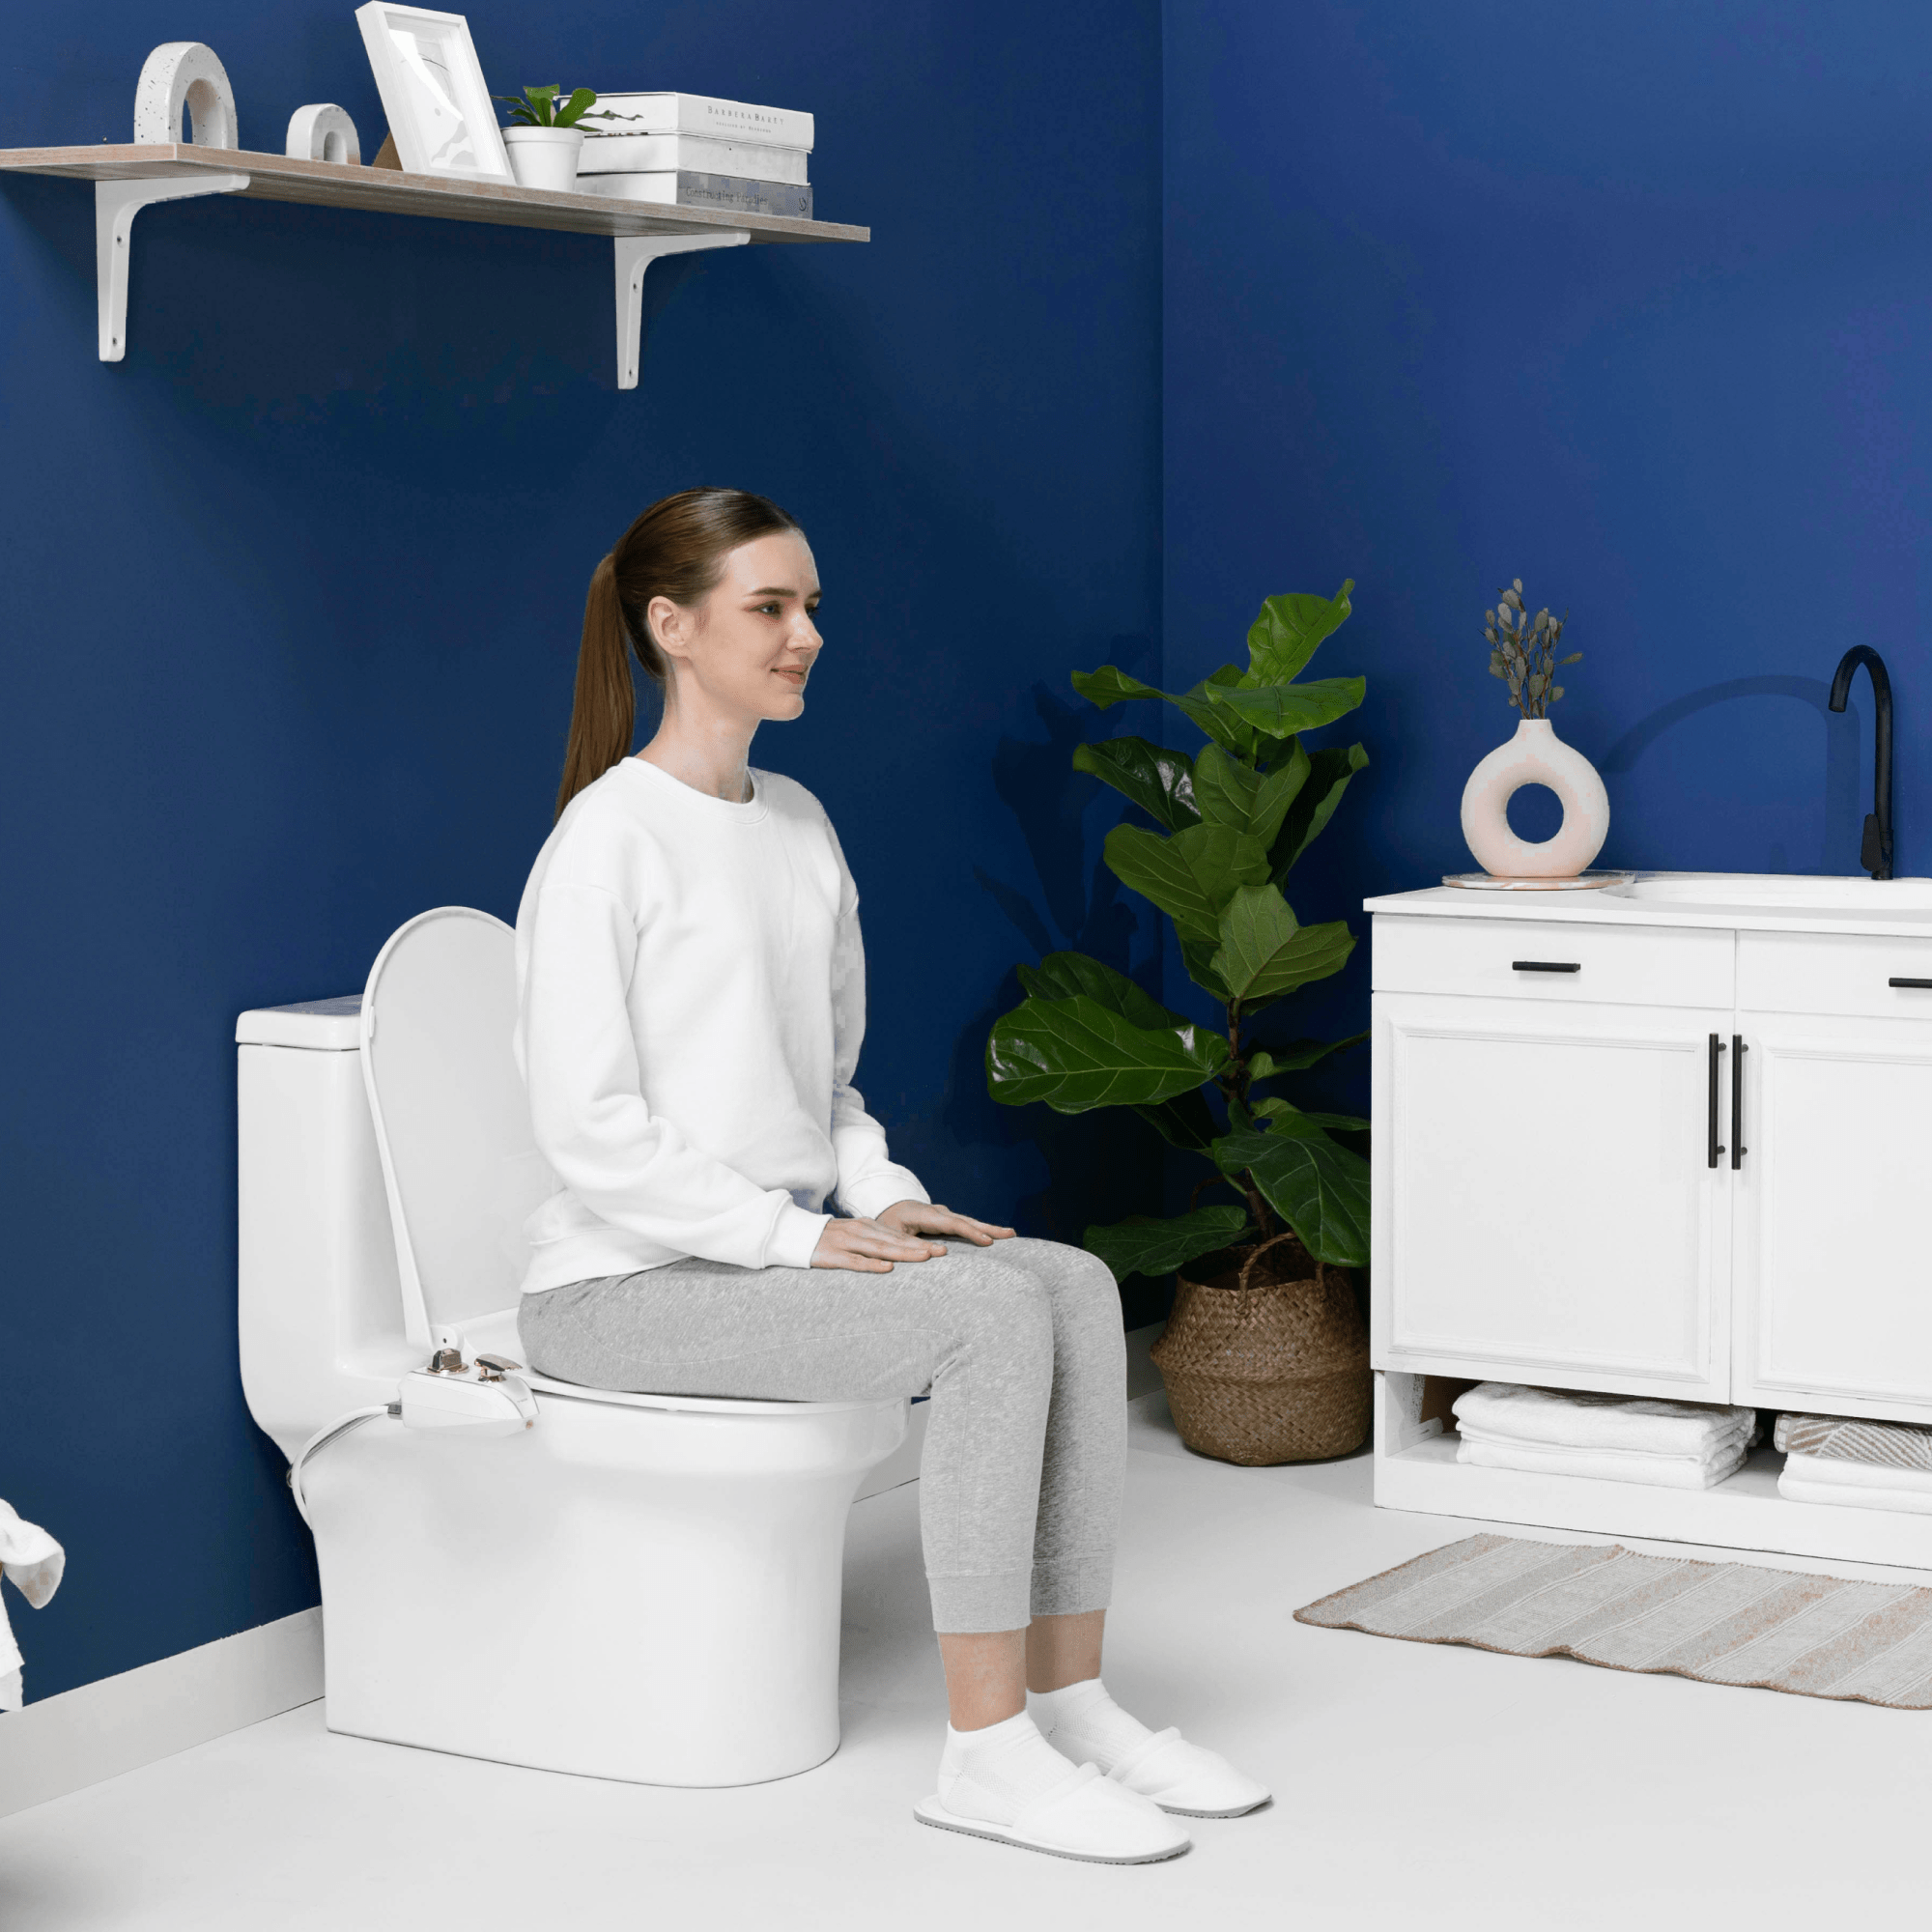 NEO 320 Plus Rose Gold installed, with a person sitting on the toilet, in a modern blue bathroom